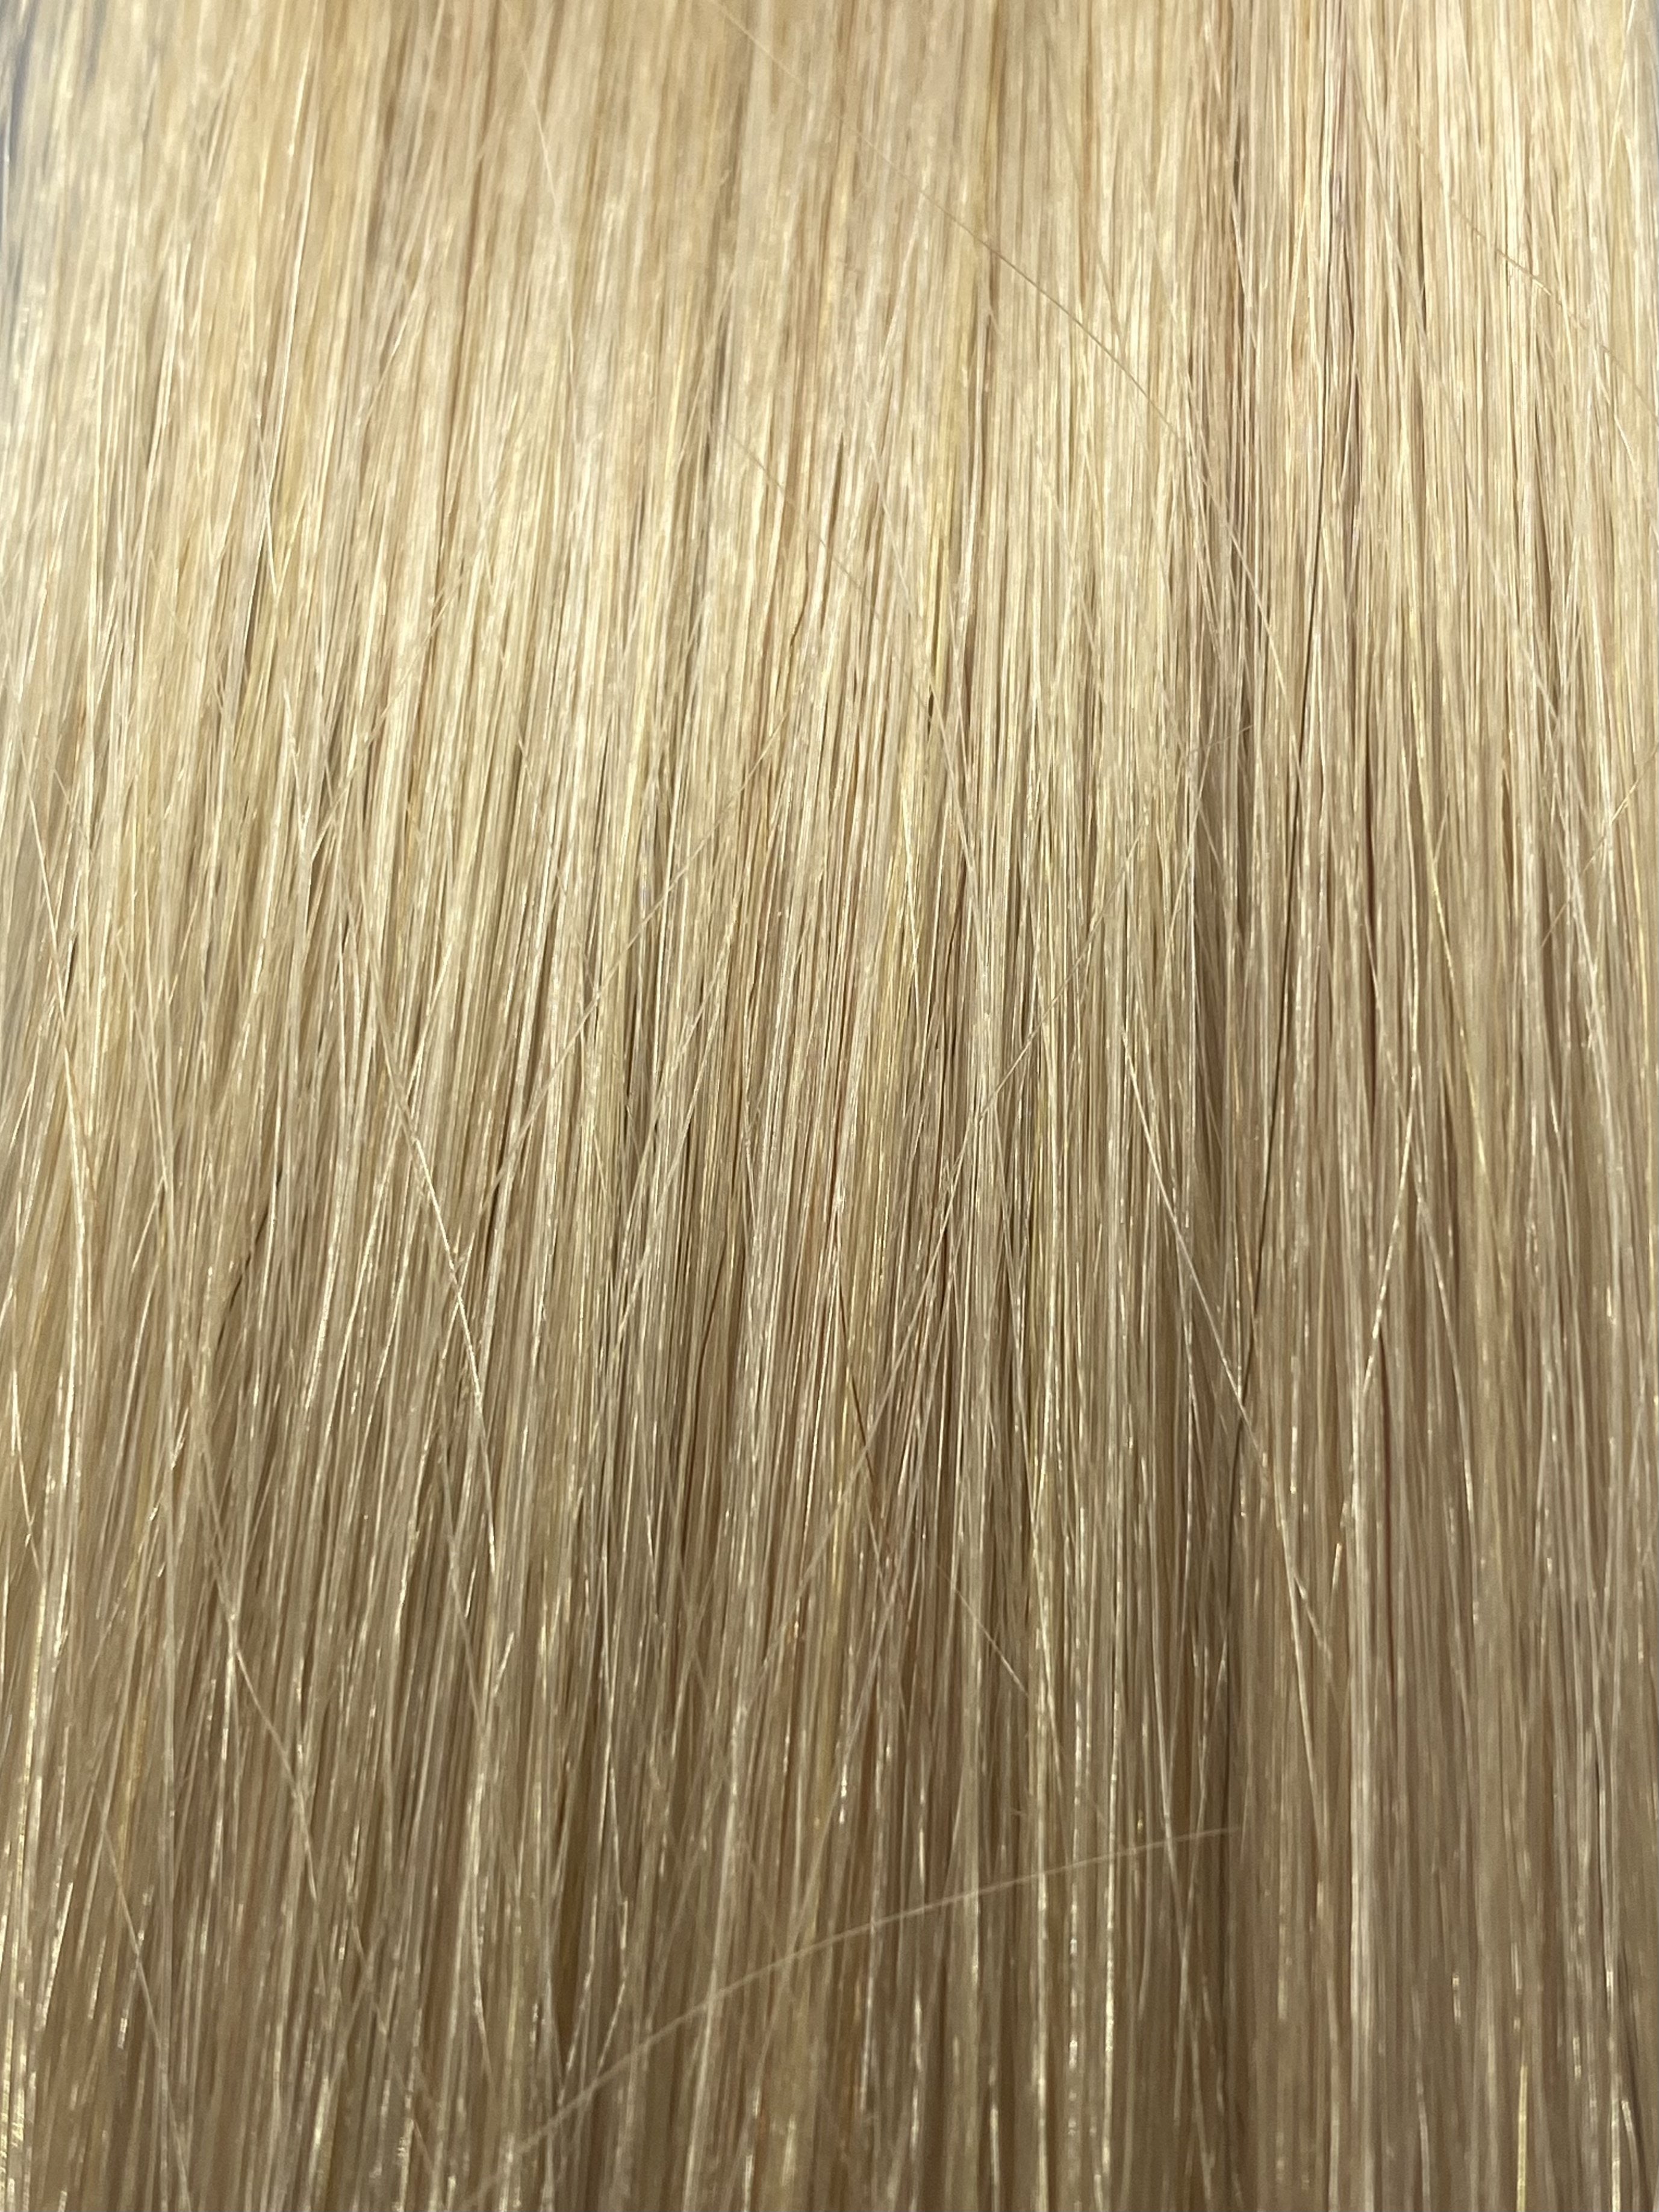 FUSION #1002 VERY LIGHT ASH BLONDE 50CM/ 20 INCHES  -  20 GRAMS